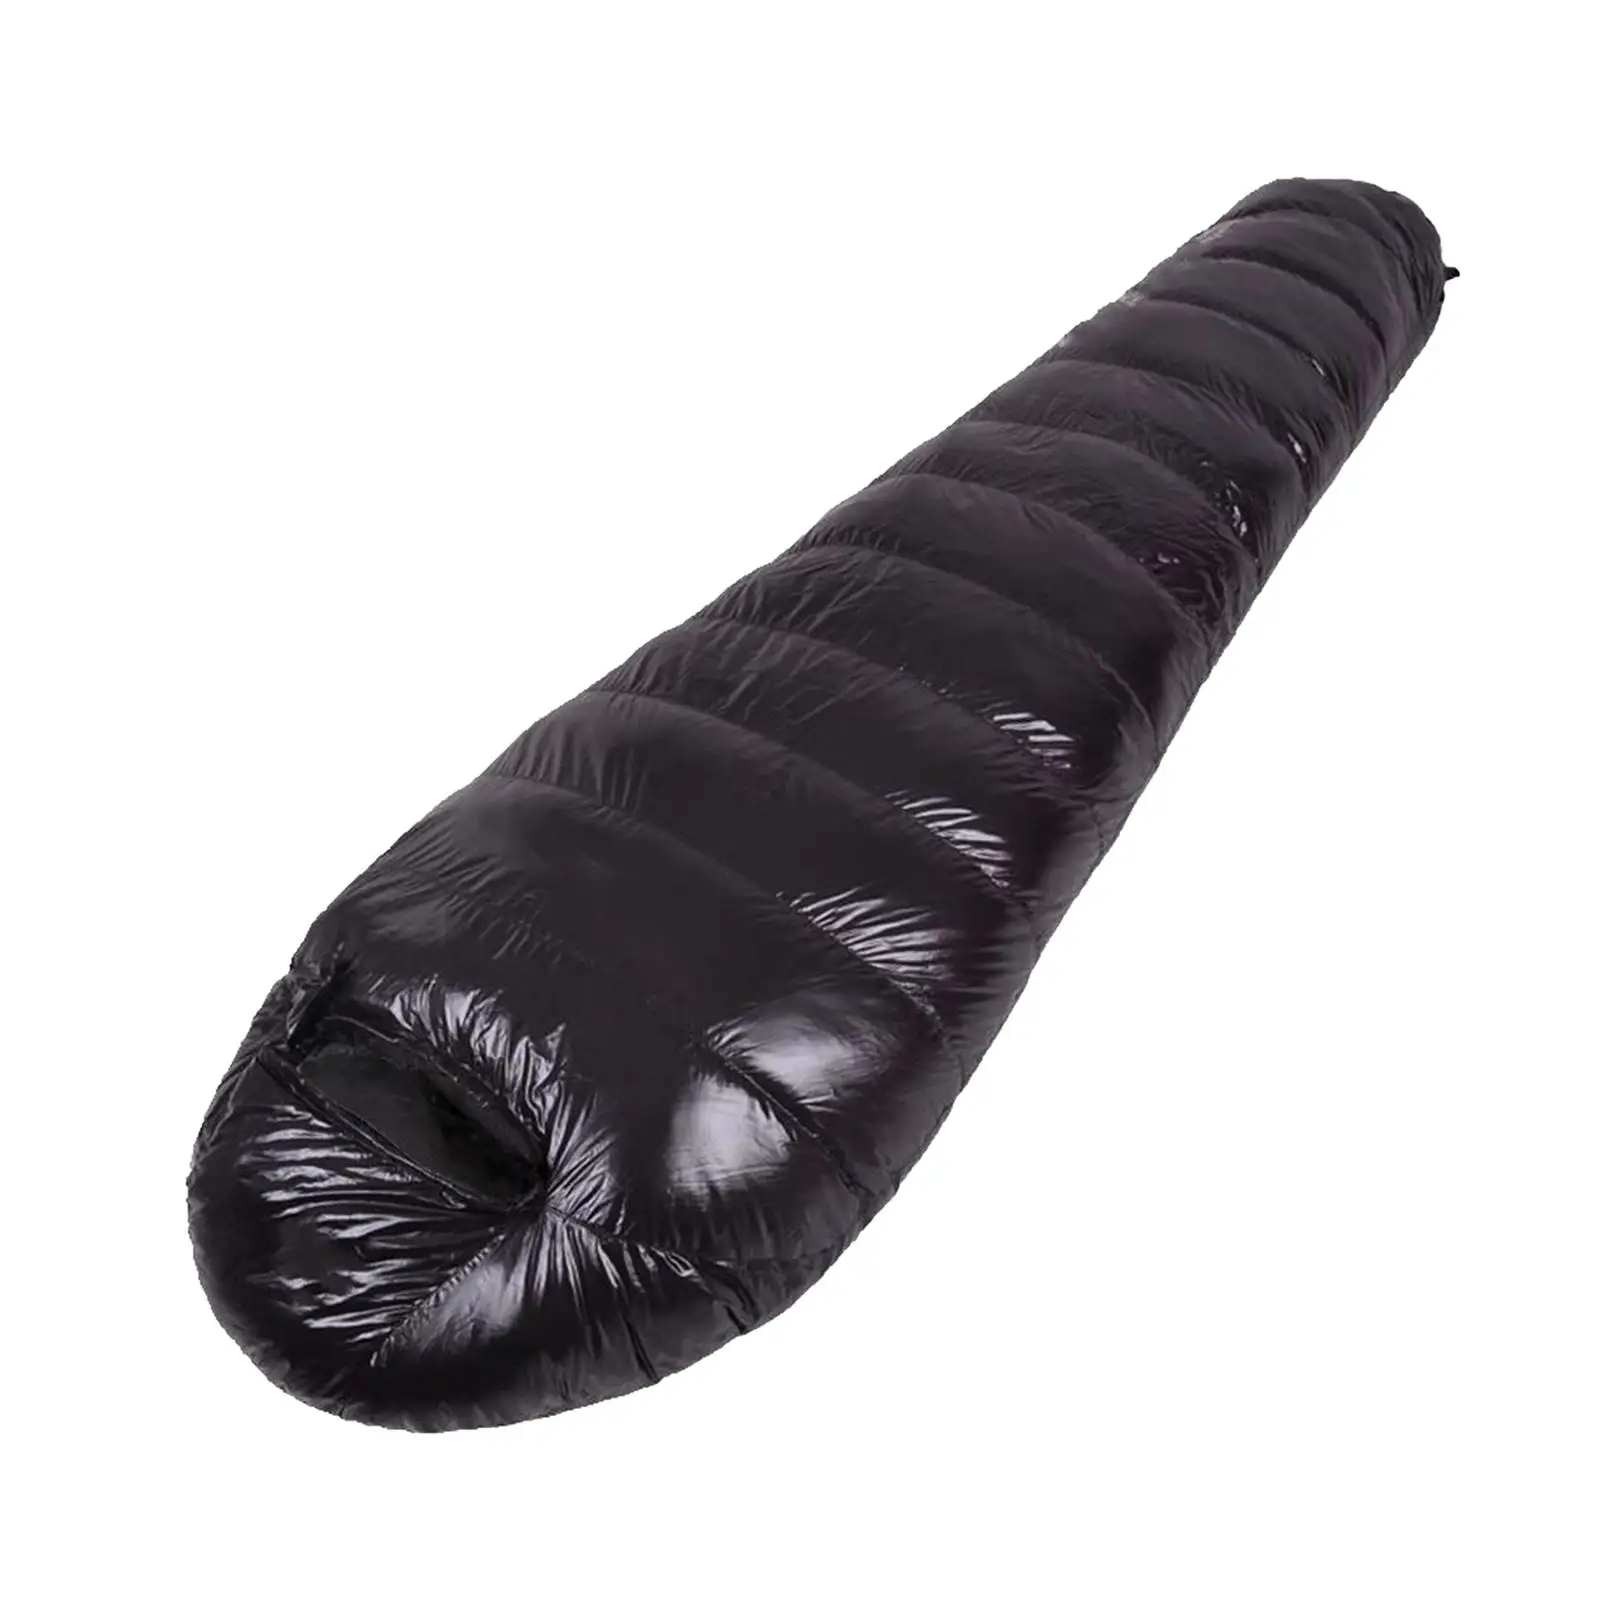 Sleeping Bag Waterproof Mummy Lightweight Fit for Winter Cold Weather Hiking